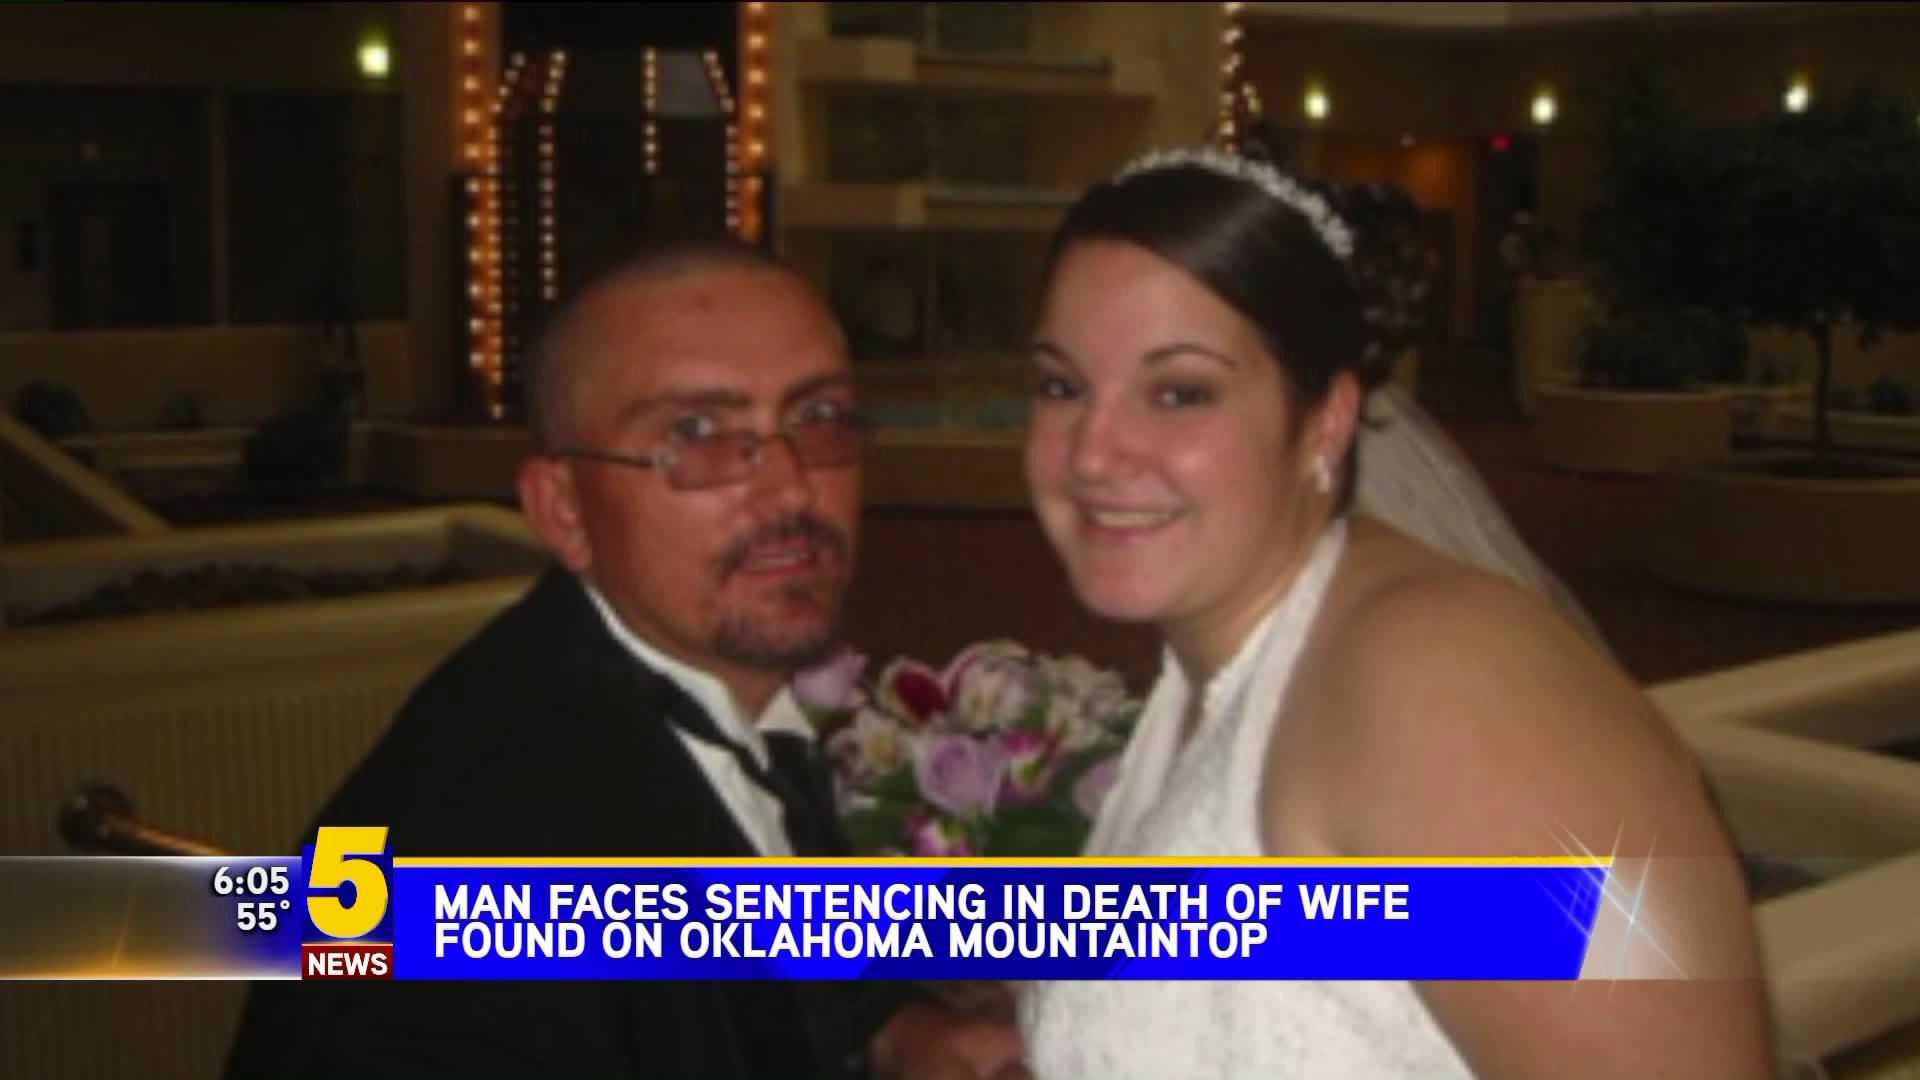 Man Faces Sentencing In Death Of Wife Found On Oklahoma Mountaintop